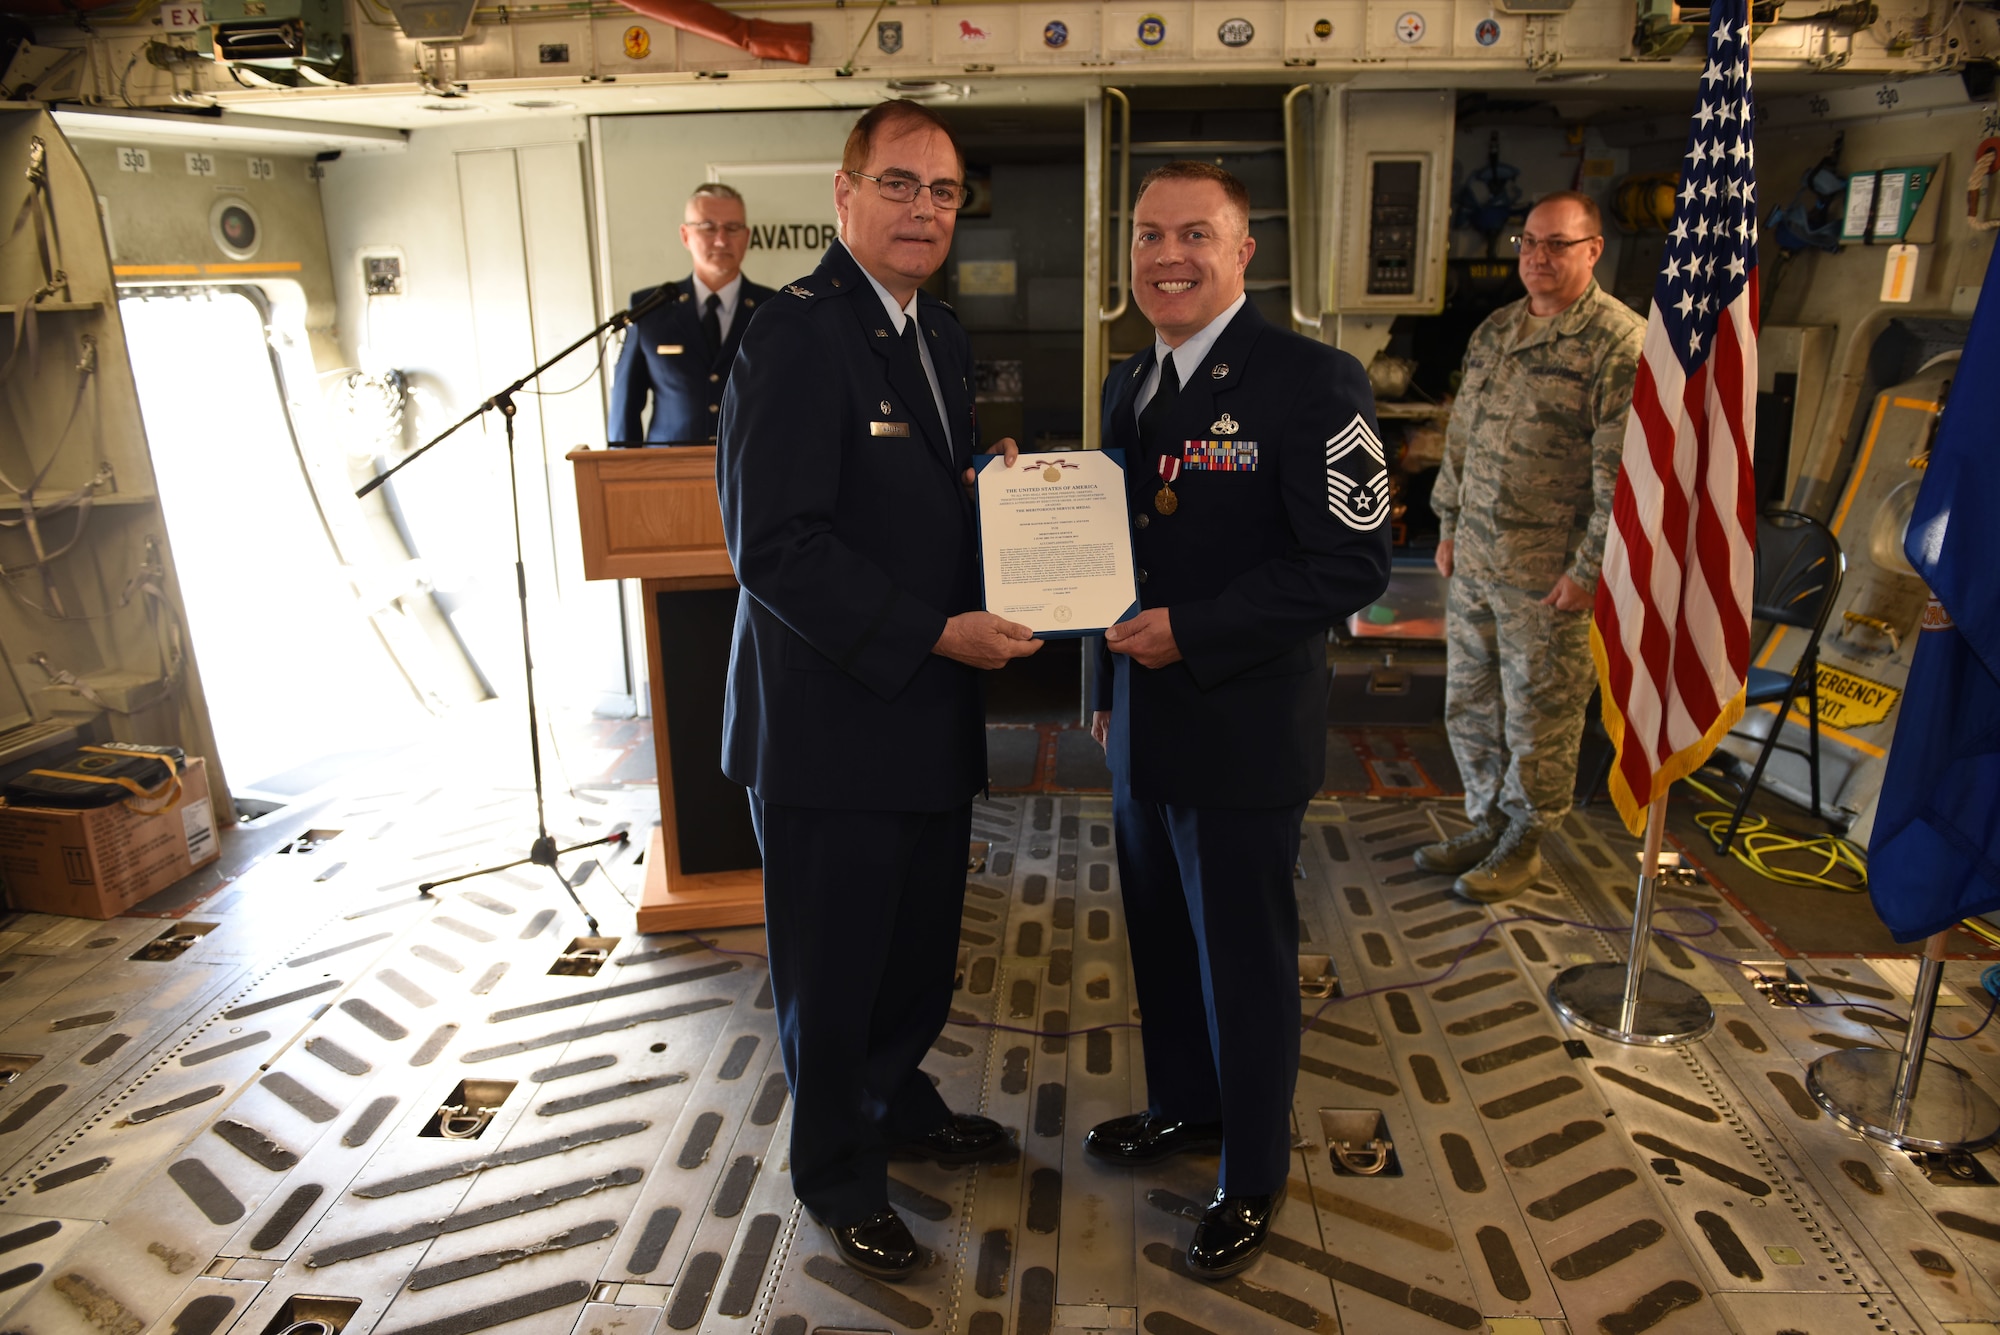 Col. Clifford Waller, commander of the 911th Maintenance Group, presents Chief Master Sgt. Timothy J. Stevens with a meritorious service medal citation during a promotion ceremony in the cargo bay of a C-17 Globemaster III at the Pittsburgh International Airport Air Reserve Station, Pennsylvania, Oct. 5, 2019.